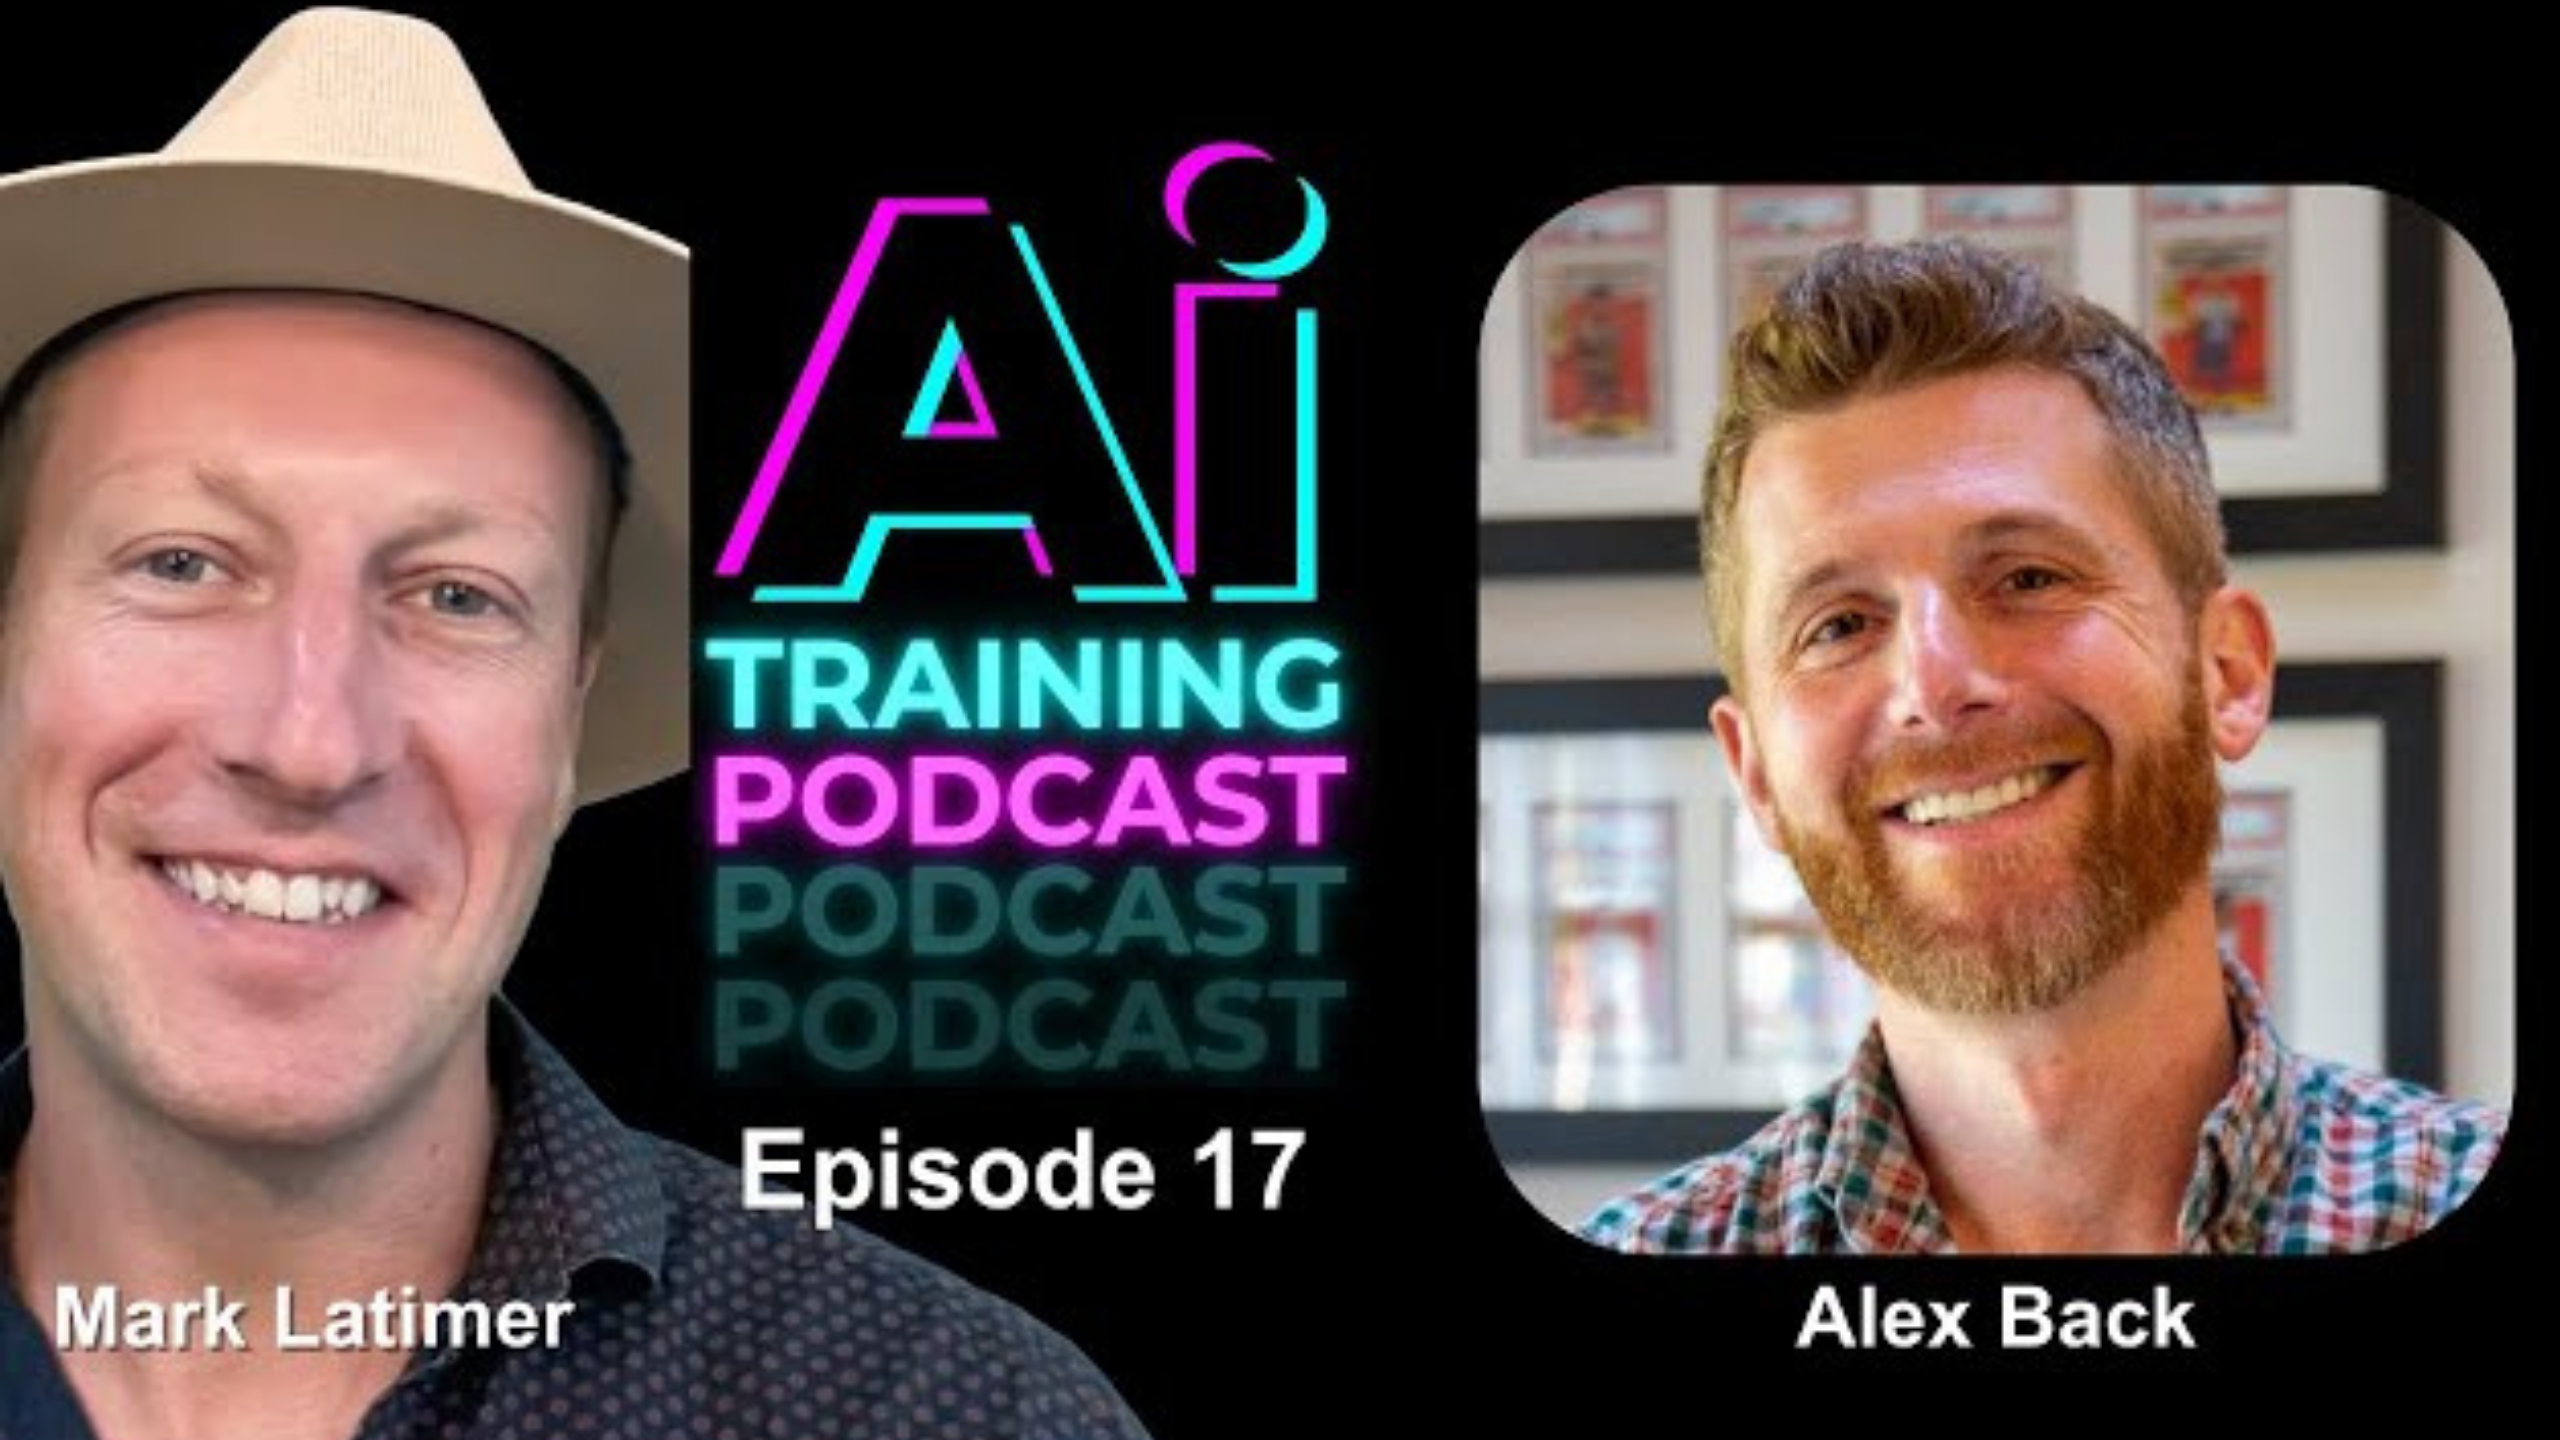 Image showing two men, each in separate frames, against a black background with colorful text in between them. The text reads "Ai Training Podcast, Episode 17." The man on the left is labeled as Mark Latimer, and the man on the right is labeled as Alex Back.